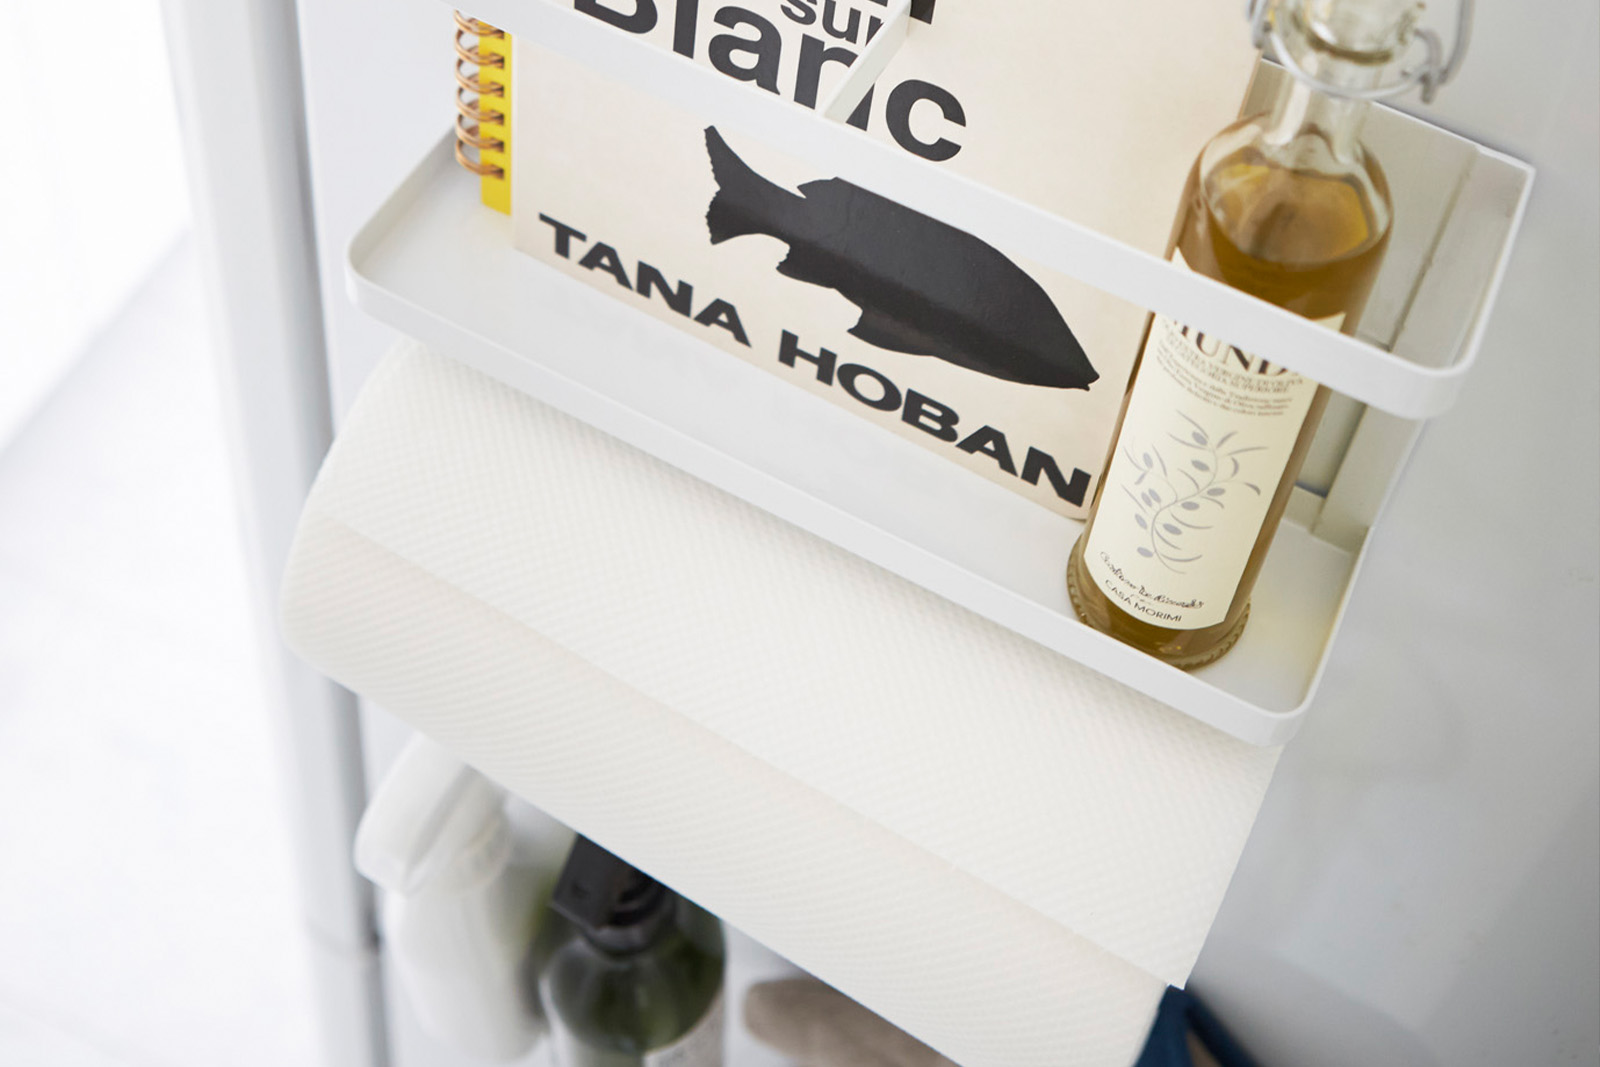 Aerial view of white Magnetic Storage Caddy holding oil bottle, book, and paper towel by Yamazaki Home.